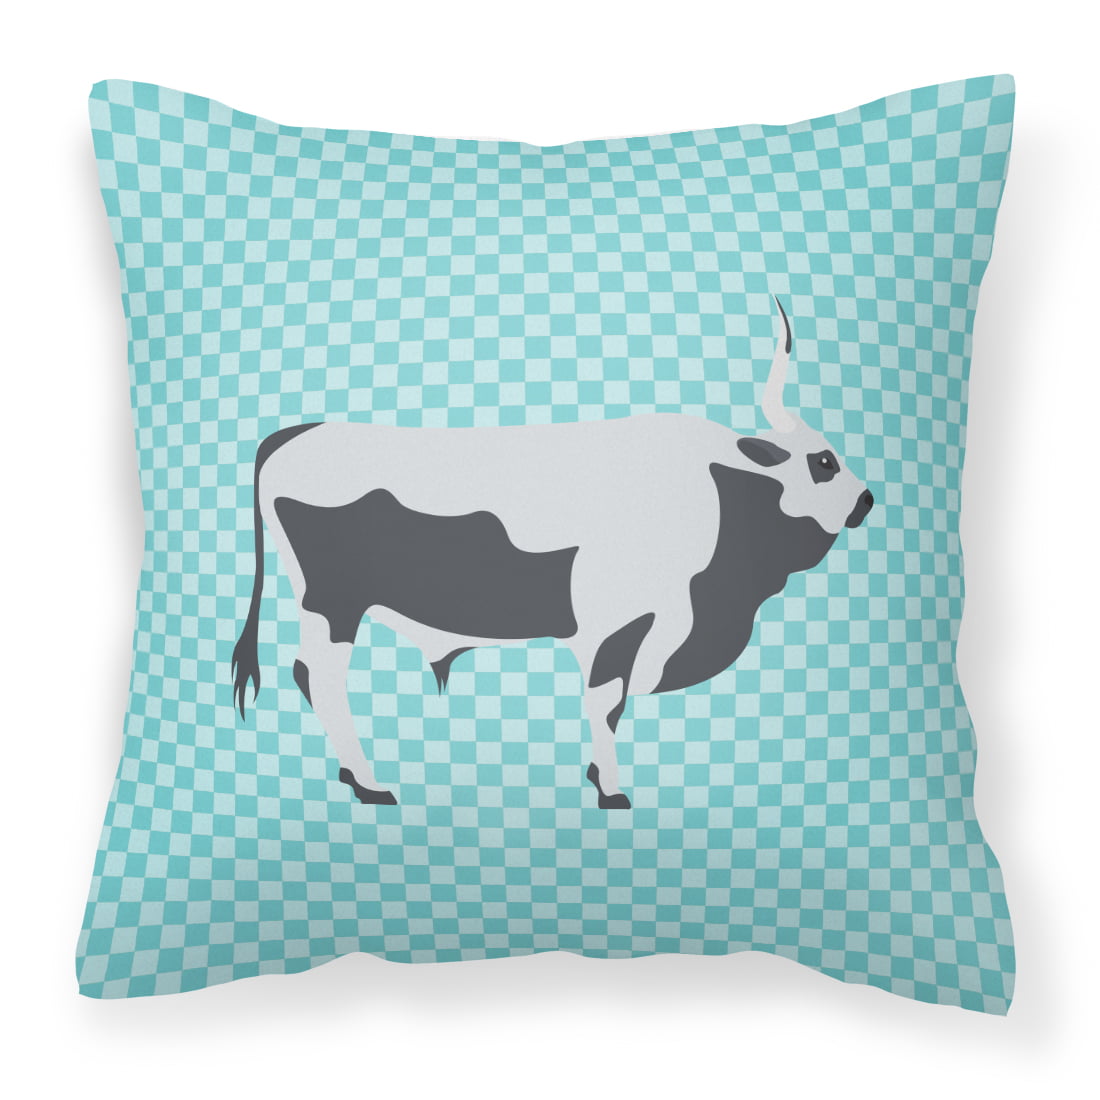 JensenDistributionServices Hungarian Grey Steppe Cow Blue Check Fabric Decorative Pillow - 14 x 14 in.